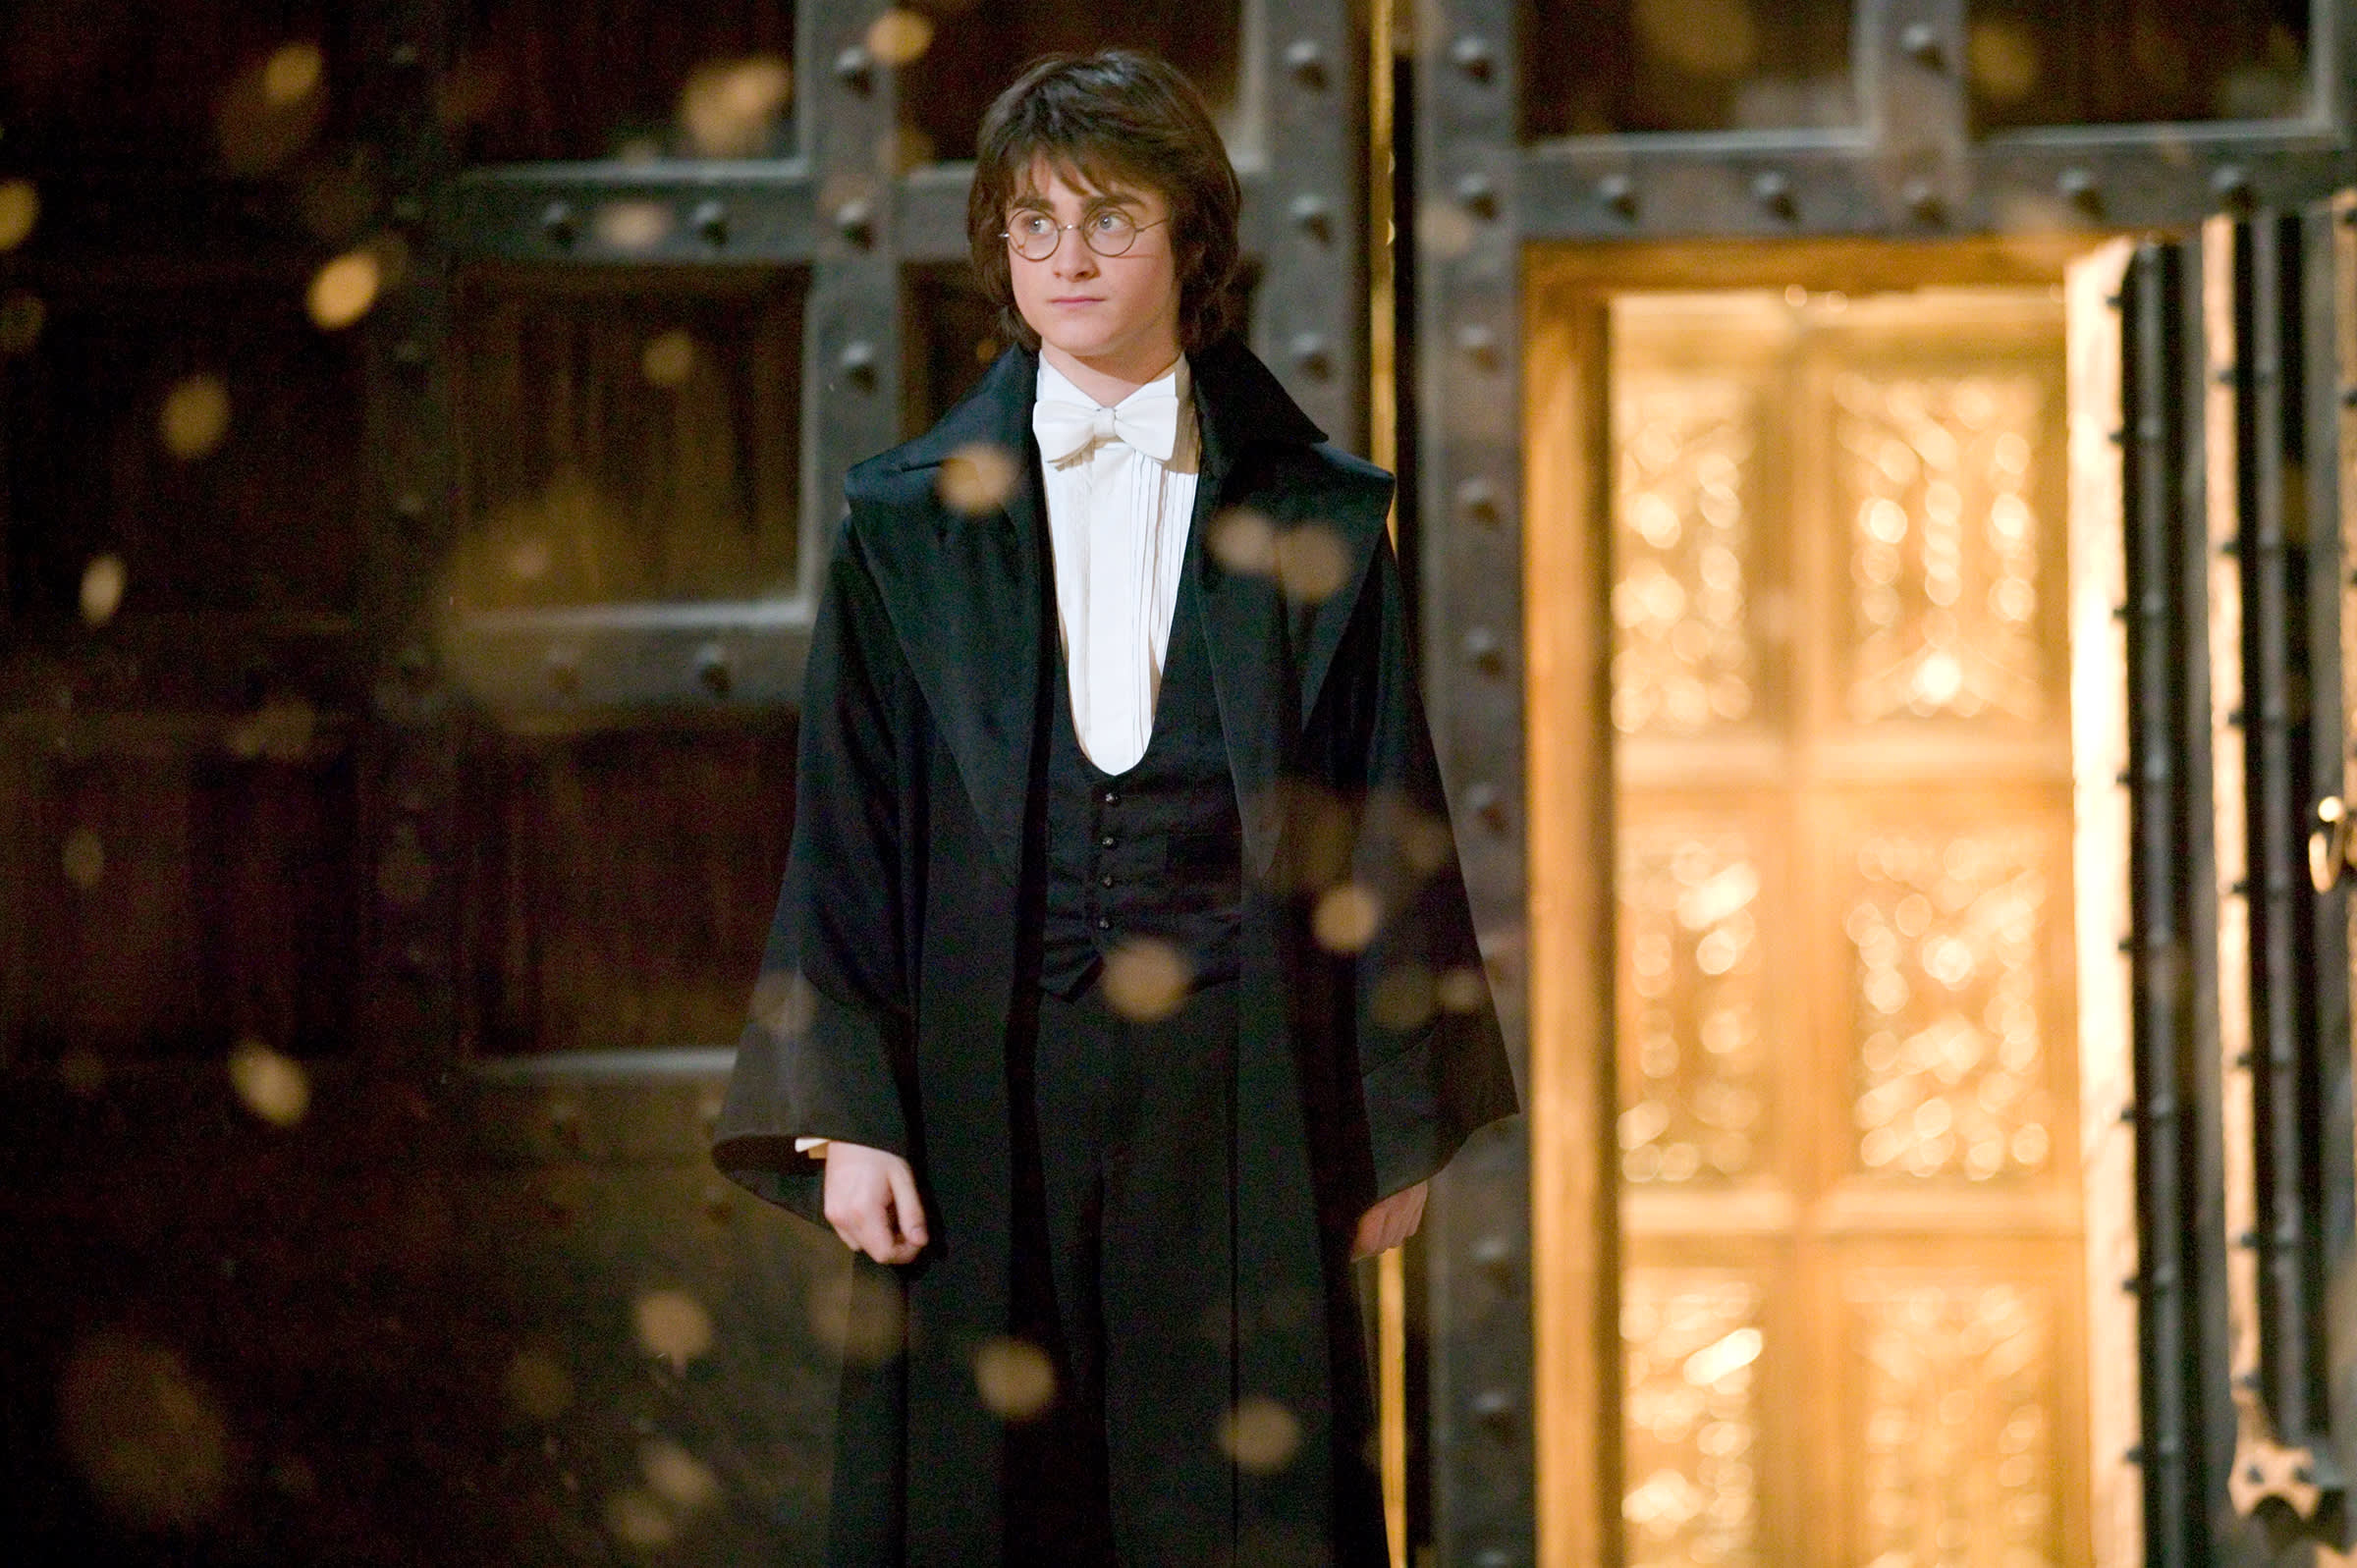 WB-F4-goblet-of-fire-harry-at-yule-ball-in-dress-robes